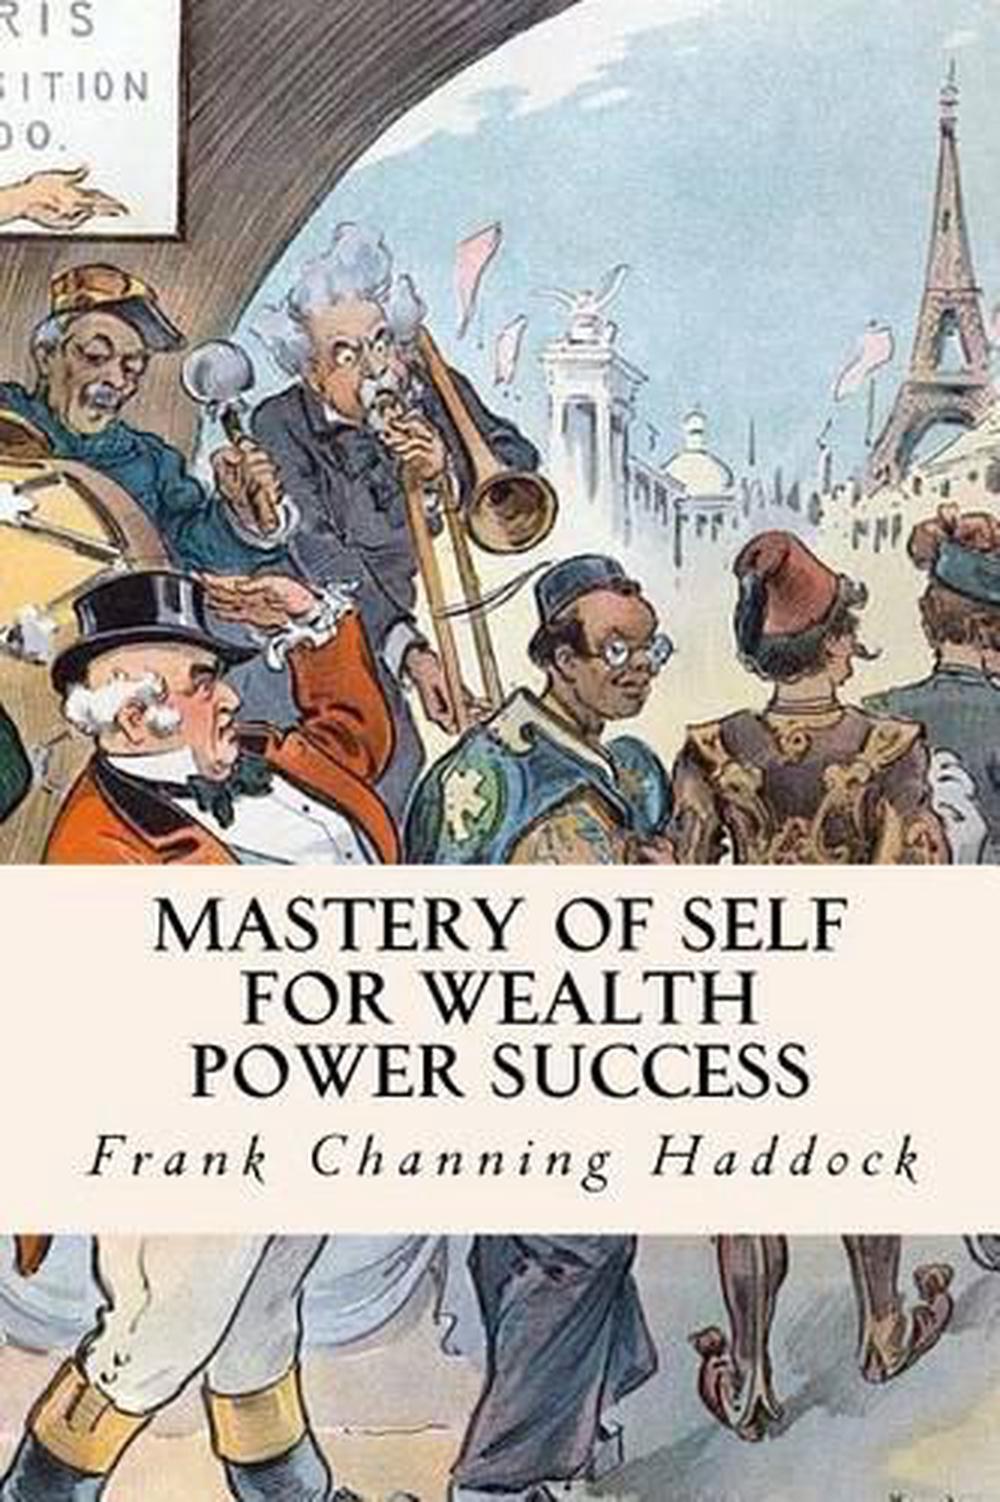 power of will frank channing haddock